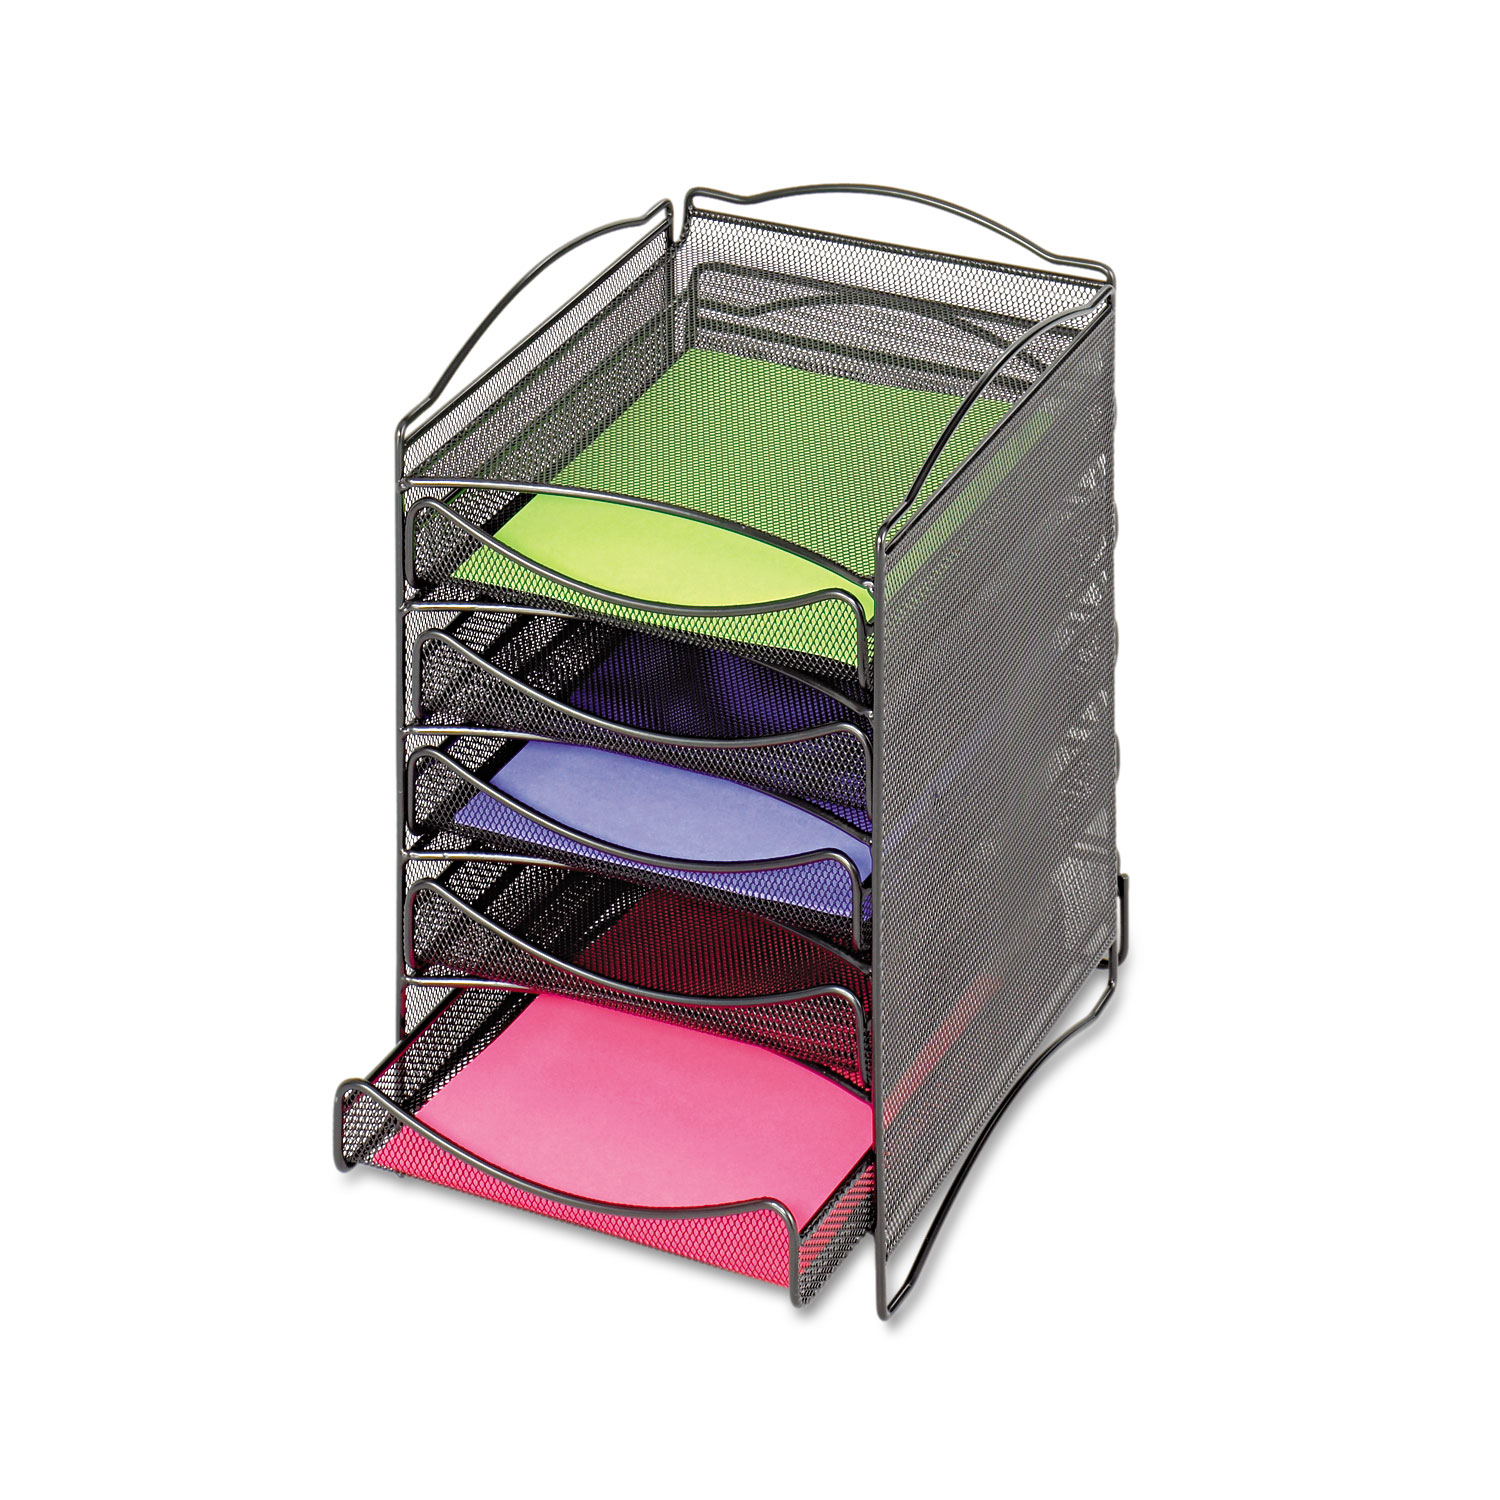 Safco 5-Compartment Mesh Desktop Organzier - Compartment Size 1.75" x 9.50" x 12.25" - 15.3" Height x 10.3" Width x 12.8" Depth 